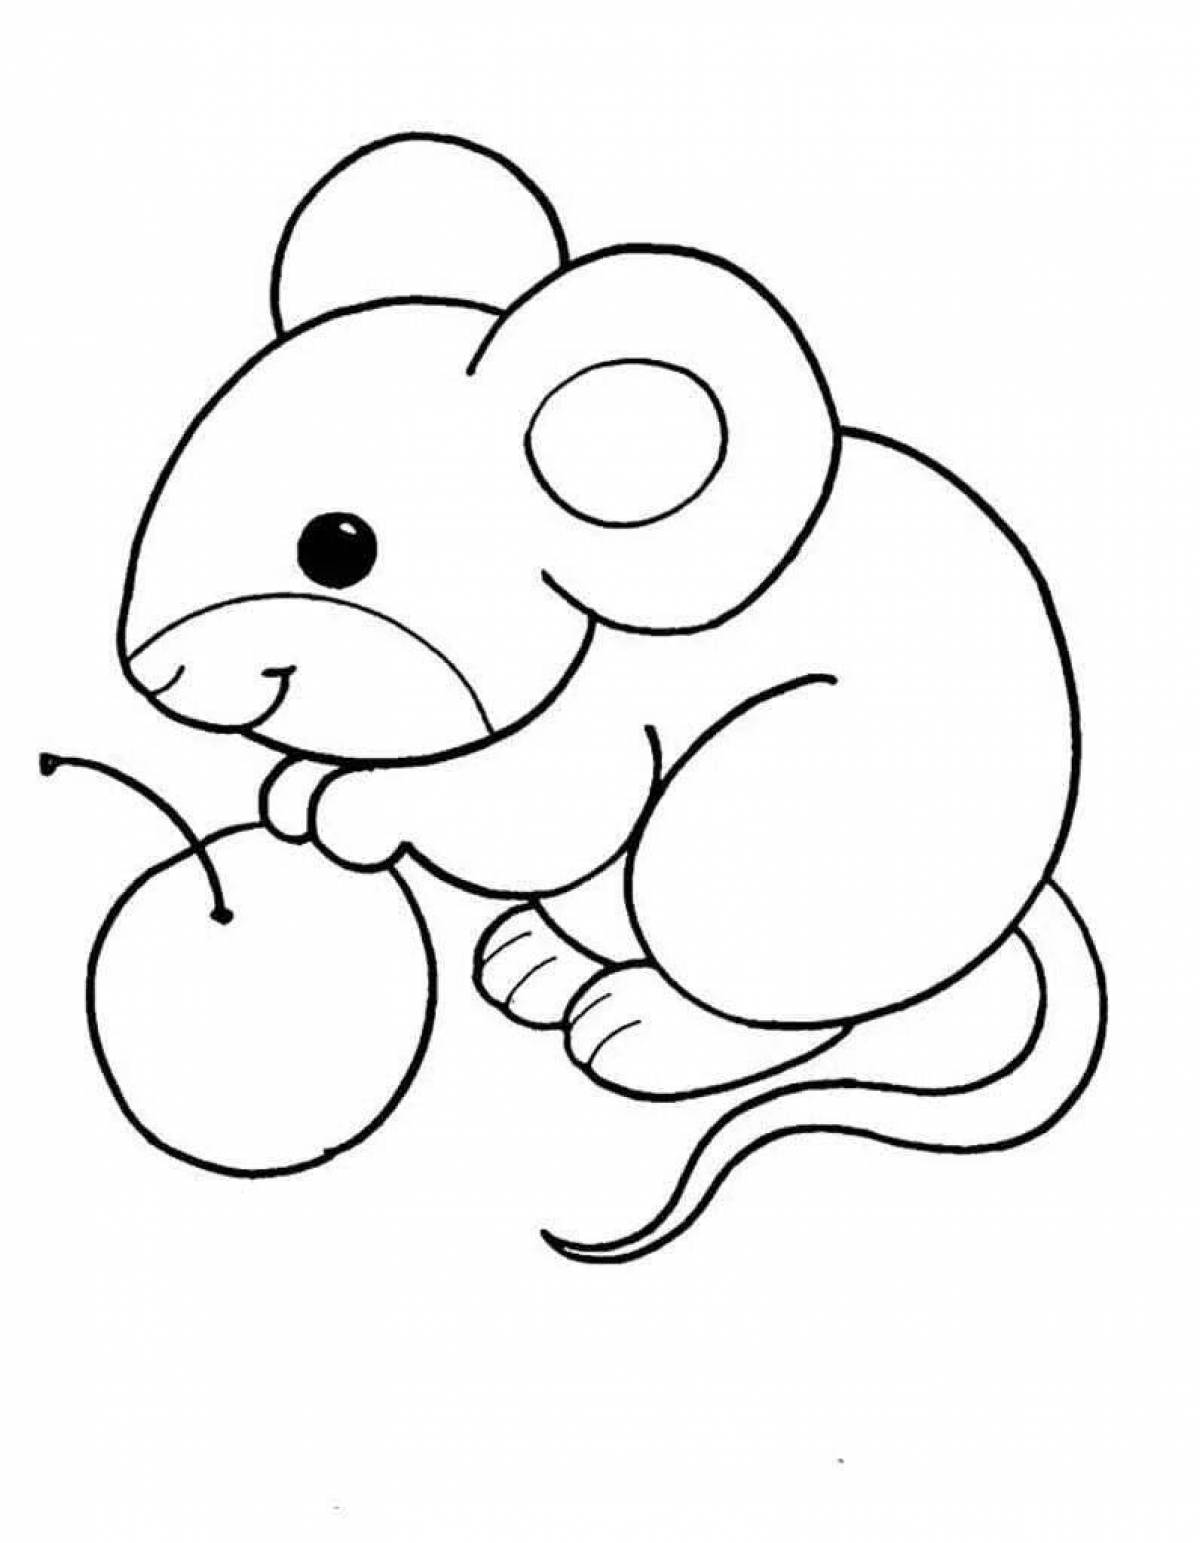 Adorable mouse coloring book for 4-5 year olds